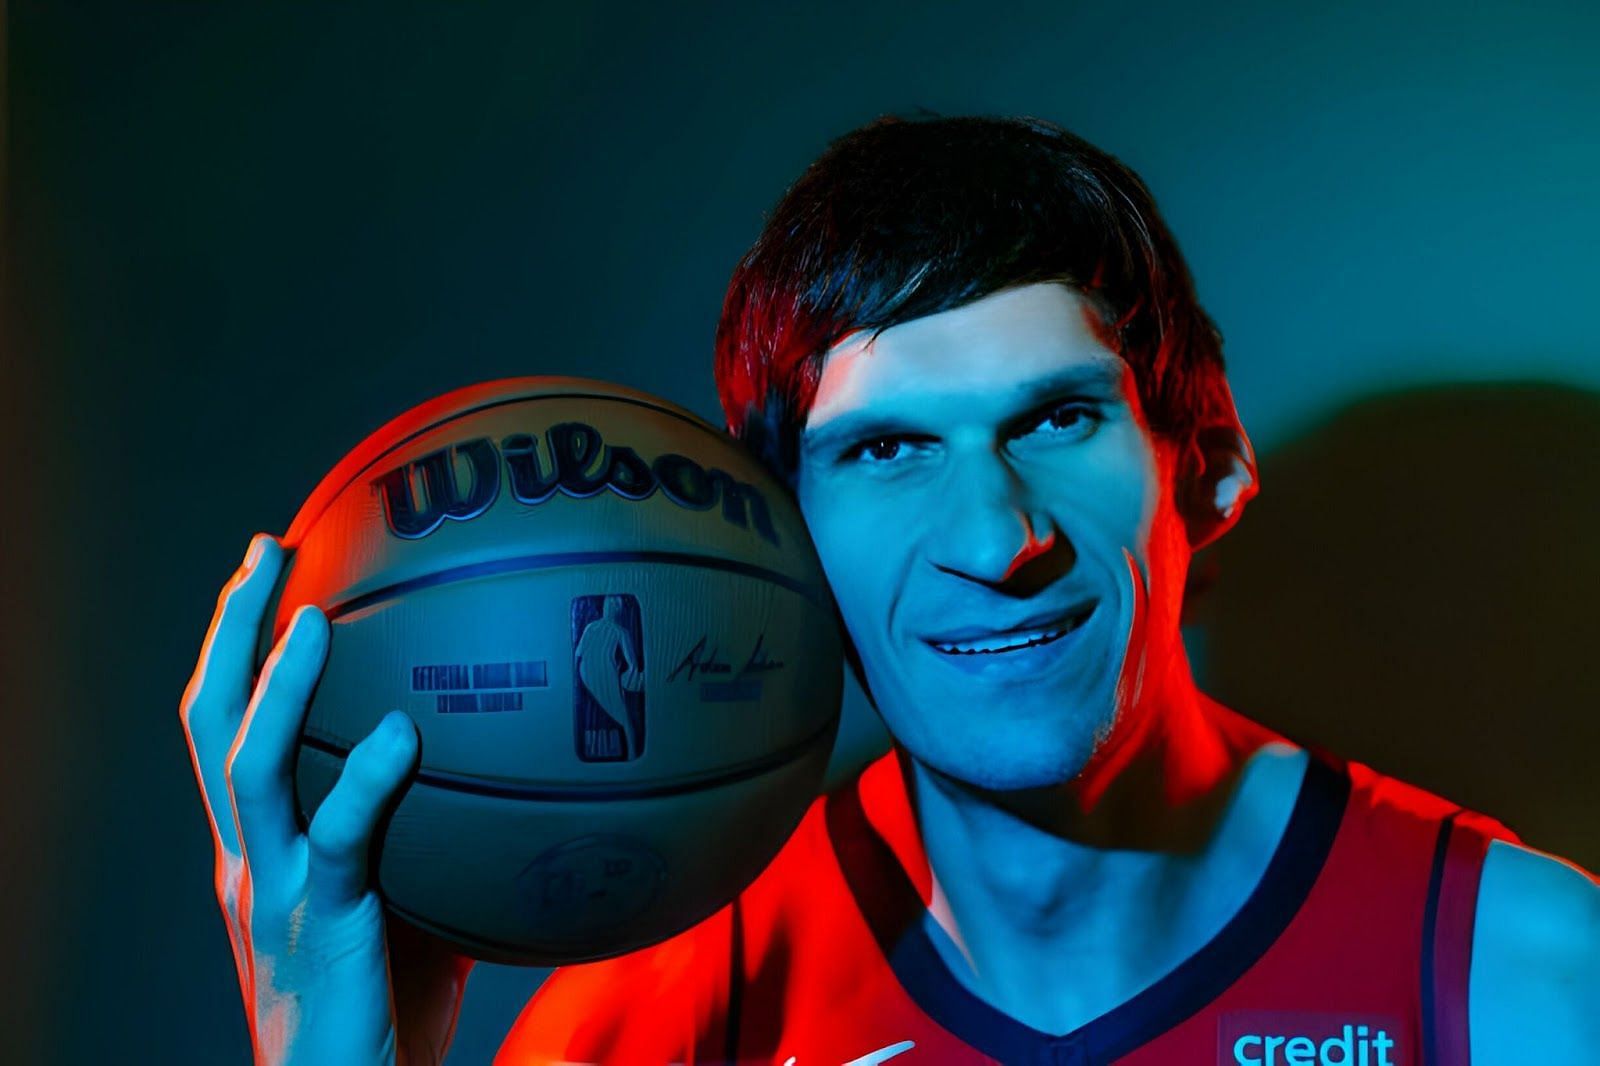 Where is Boban Marjanovic from?